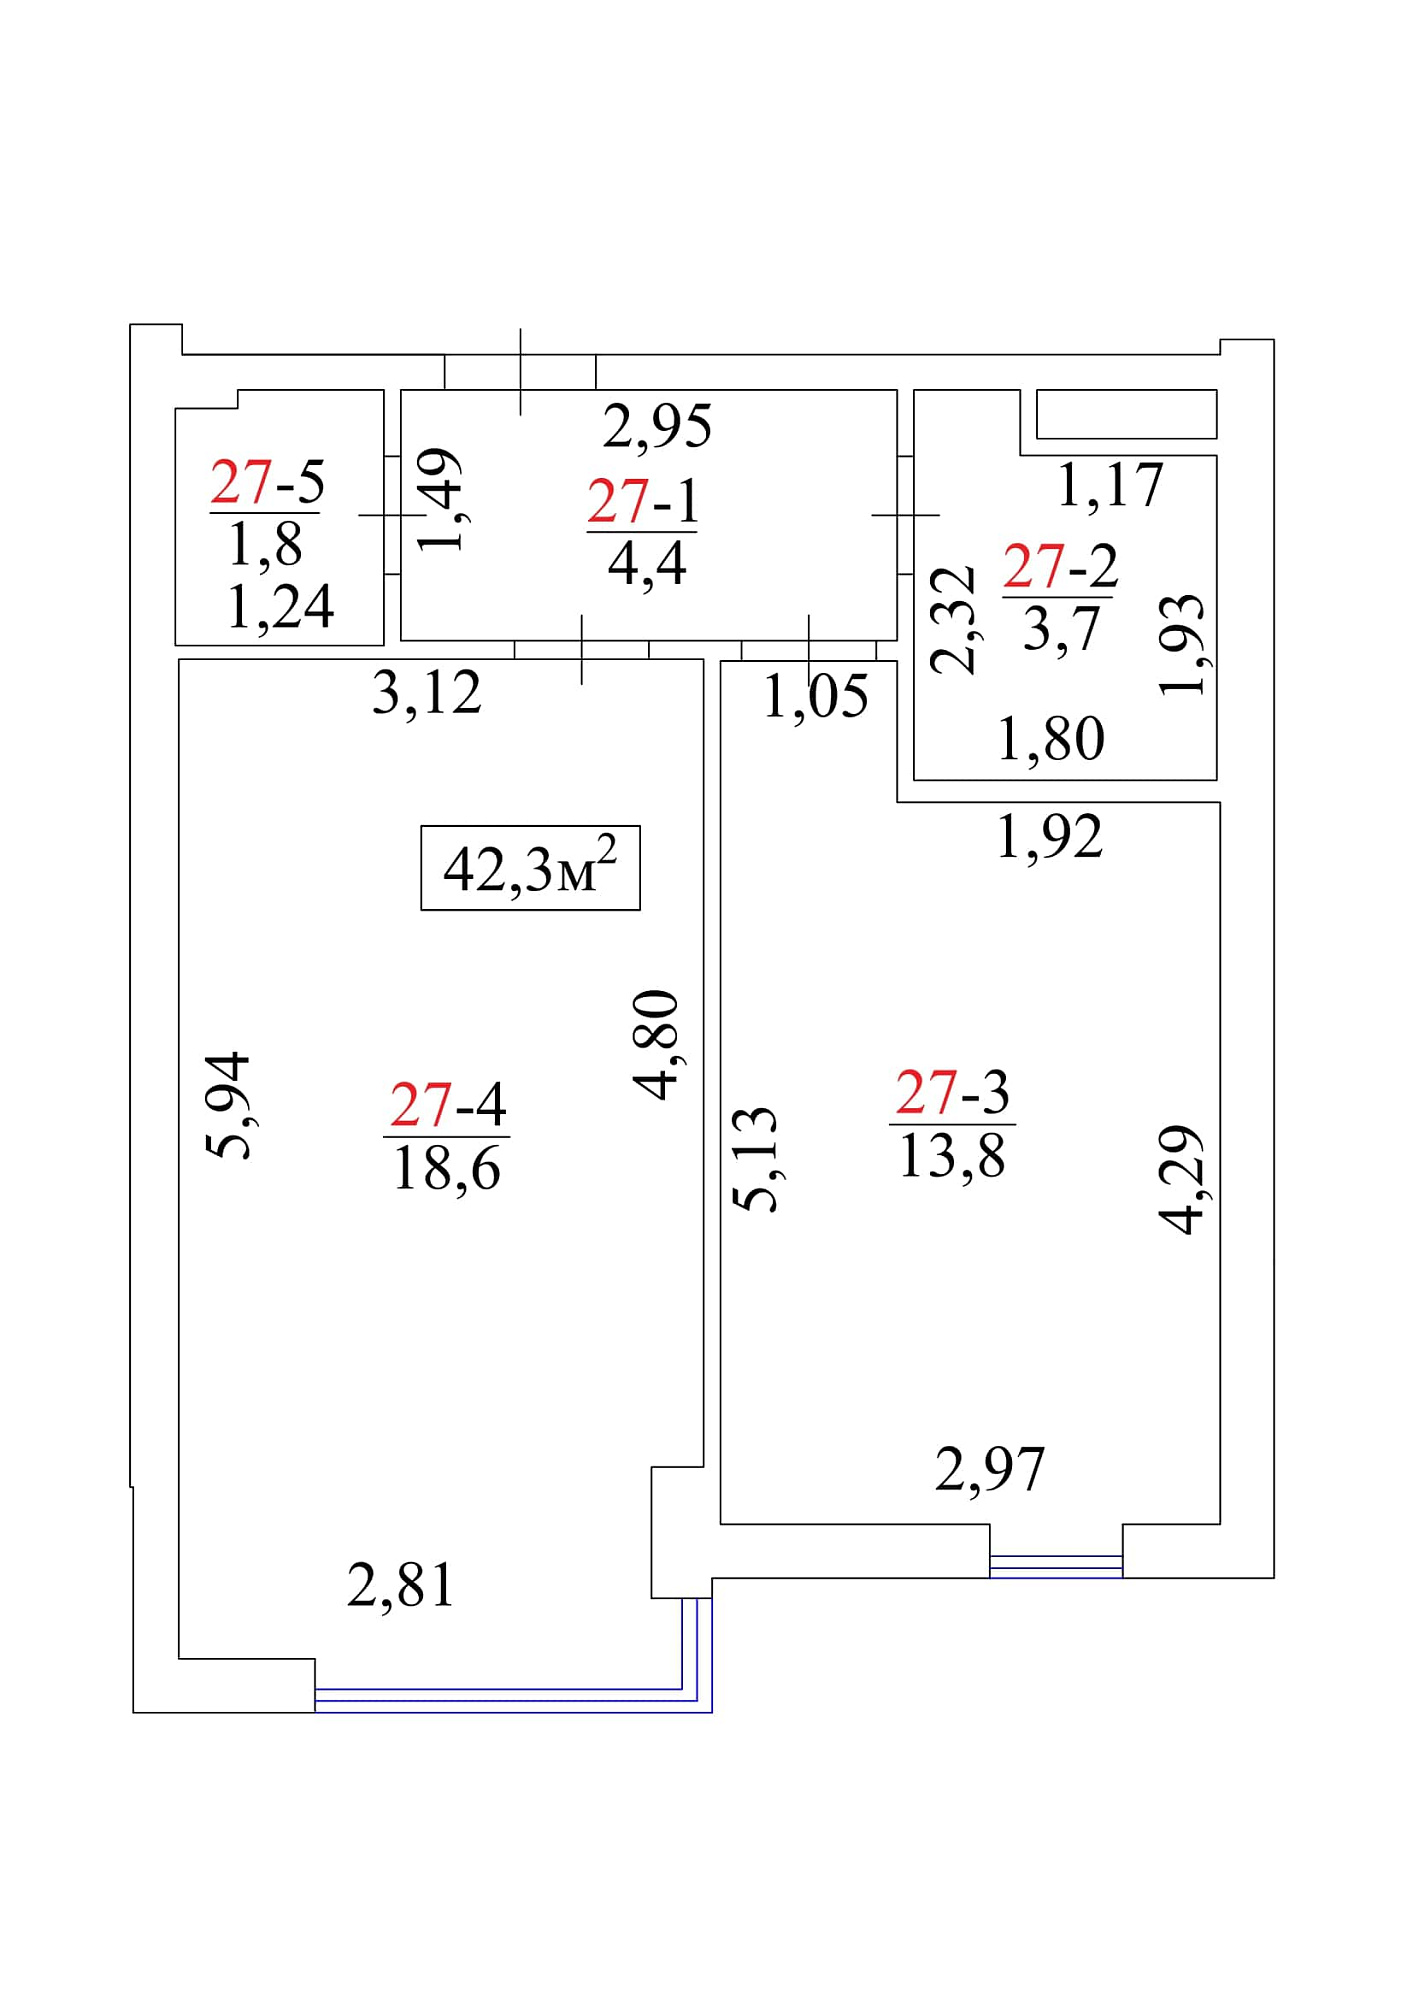 Planning 1-rm flats area 42.3m2, AB-01-04/00027.